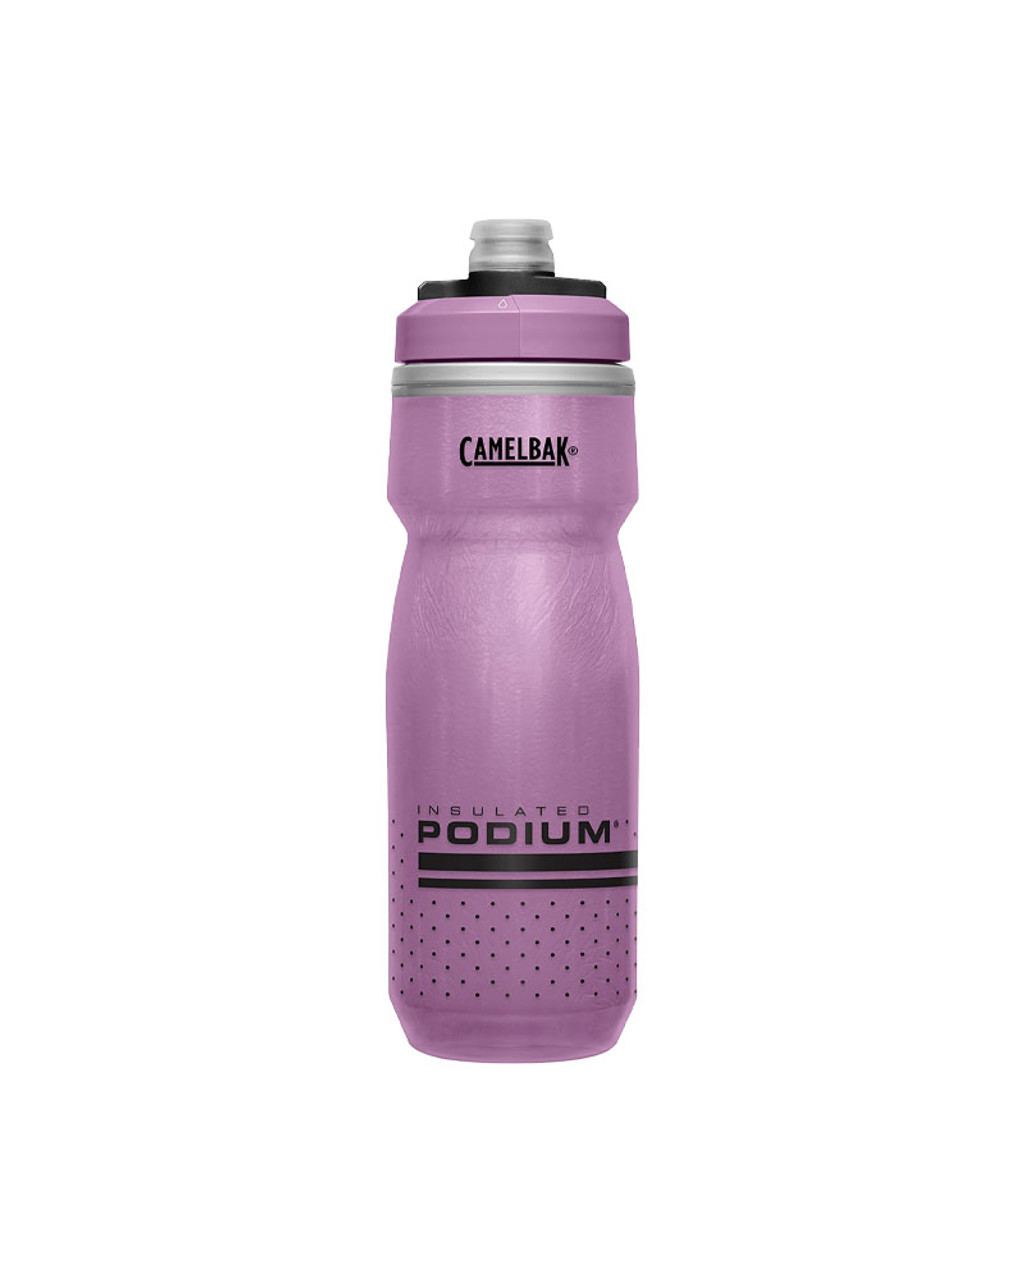 skrive For pokker menneskemængde Camelbak Podium Chill Insulated Cycling Water Bottle | New Era Cycle